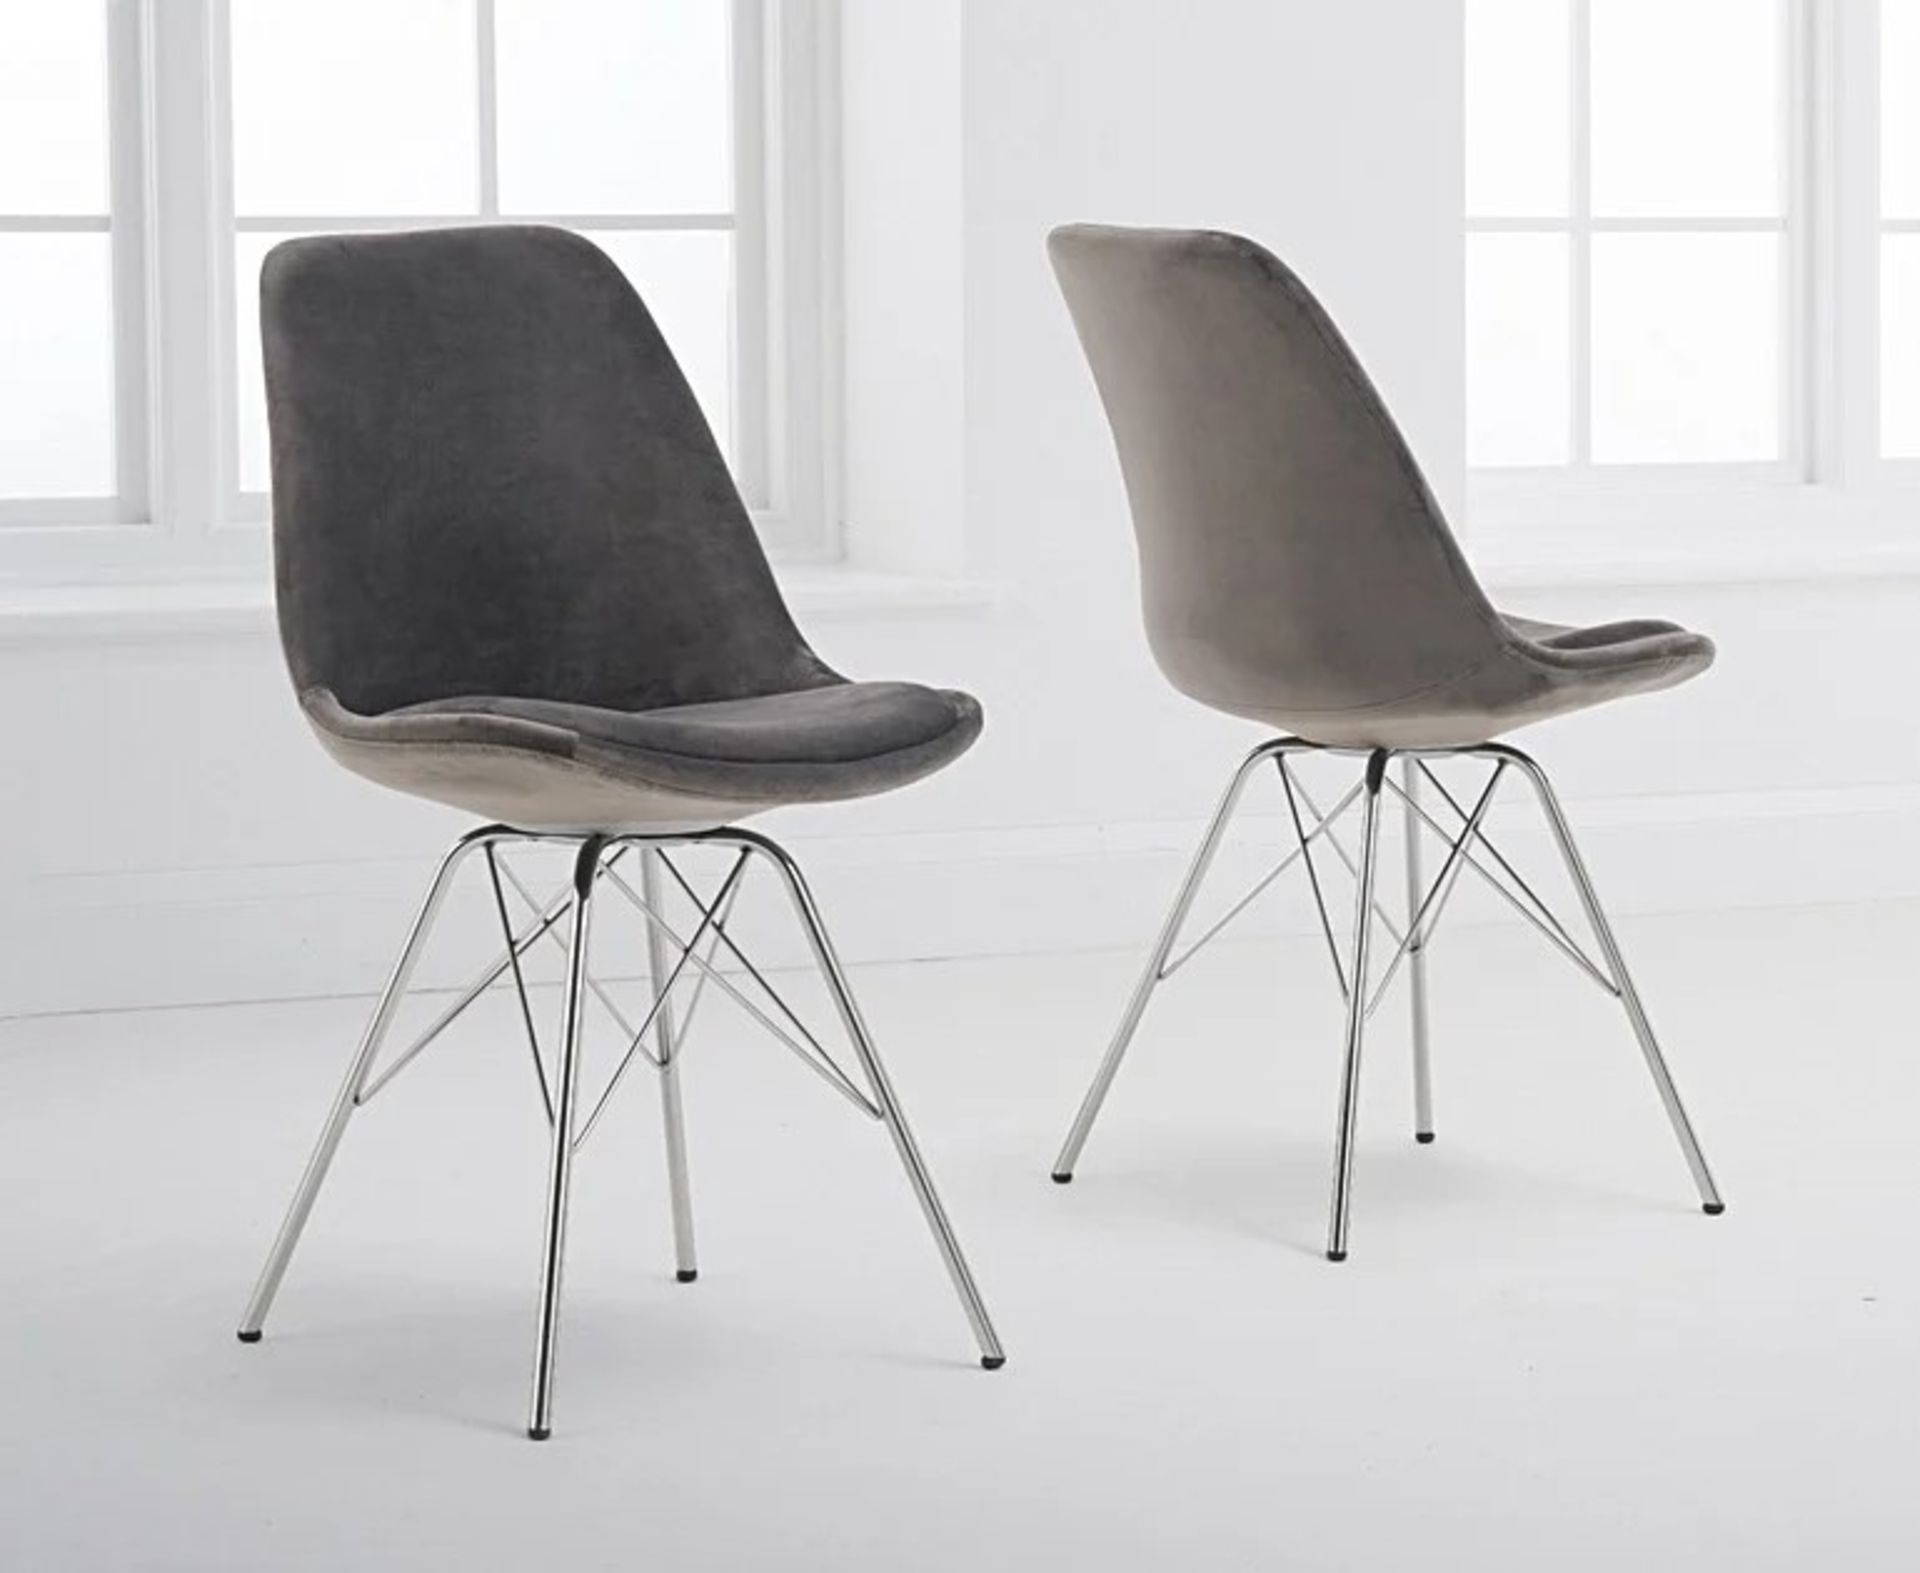 Celine Velvet Grey Dining Chair In pure retro style, the Celine chairs feature rich colours,